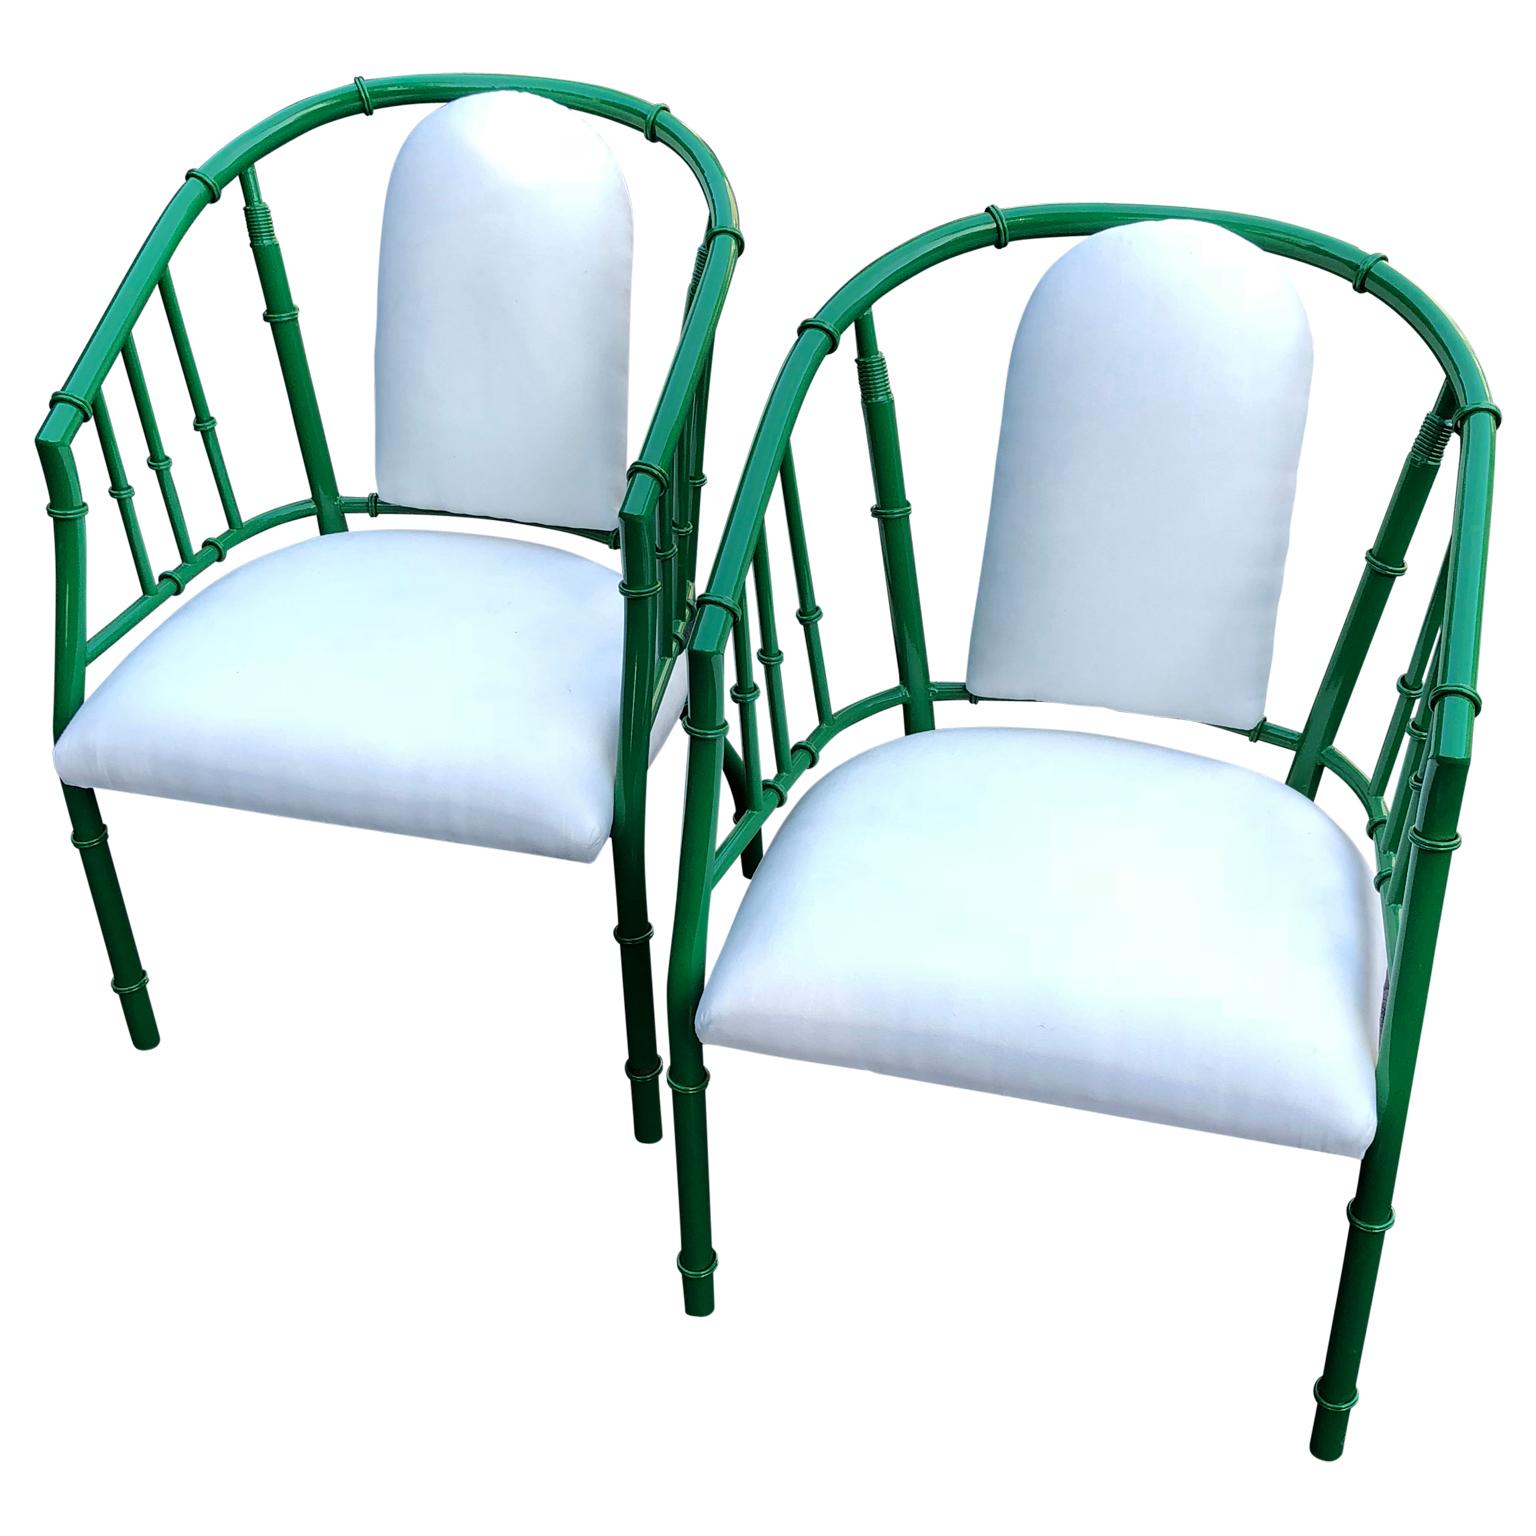 Pair Of French Green Mid-Century Modern Faux Bamboo Metal Armchairs For Sale